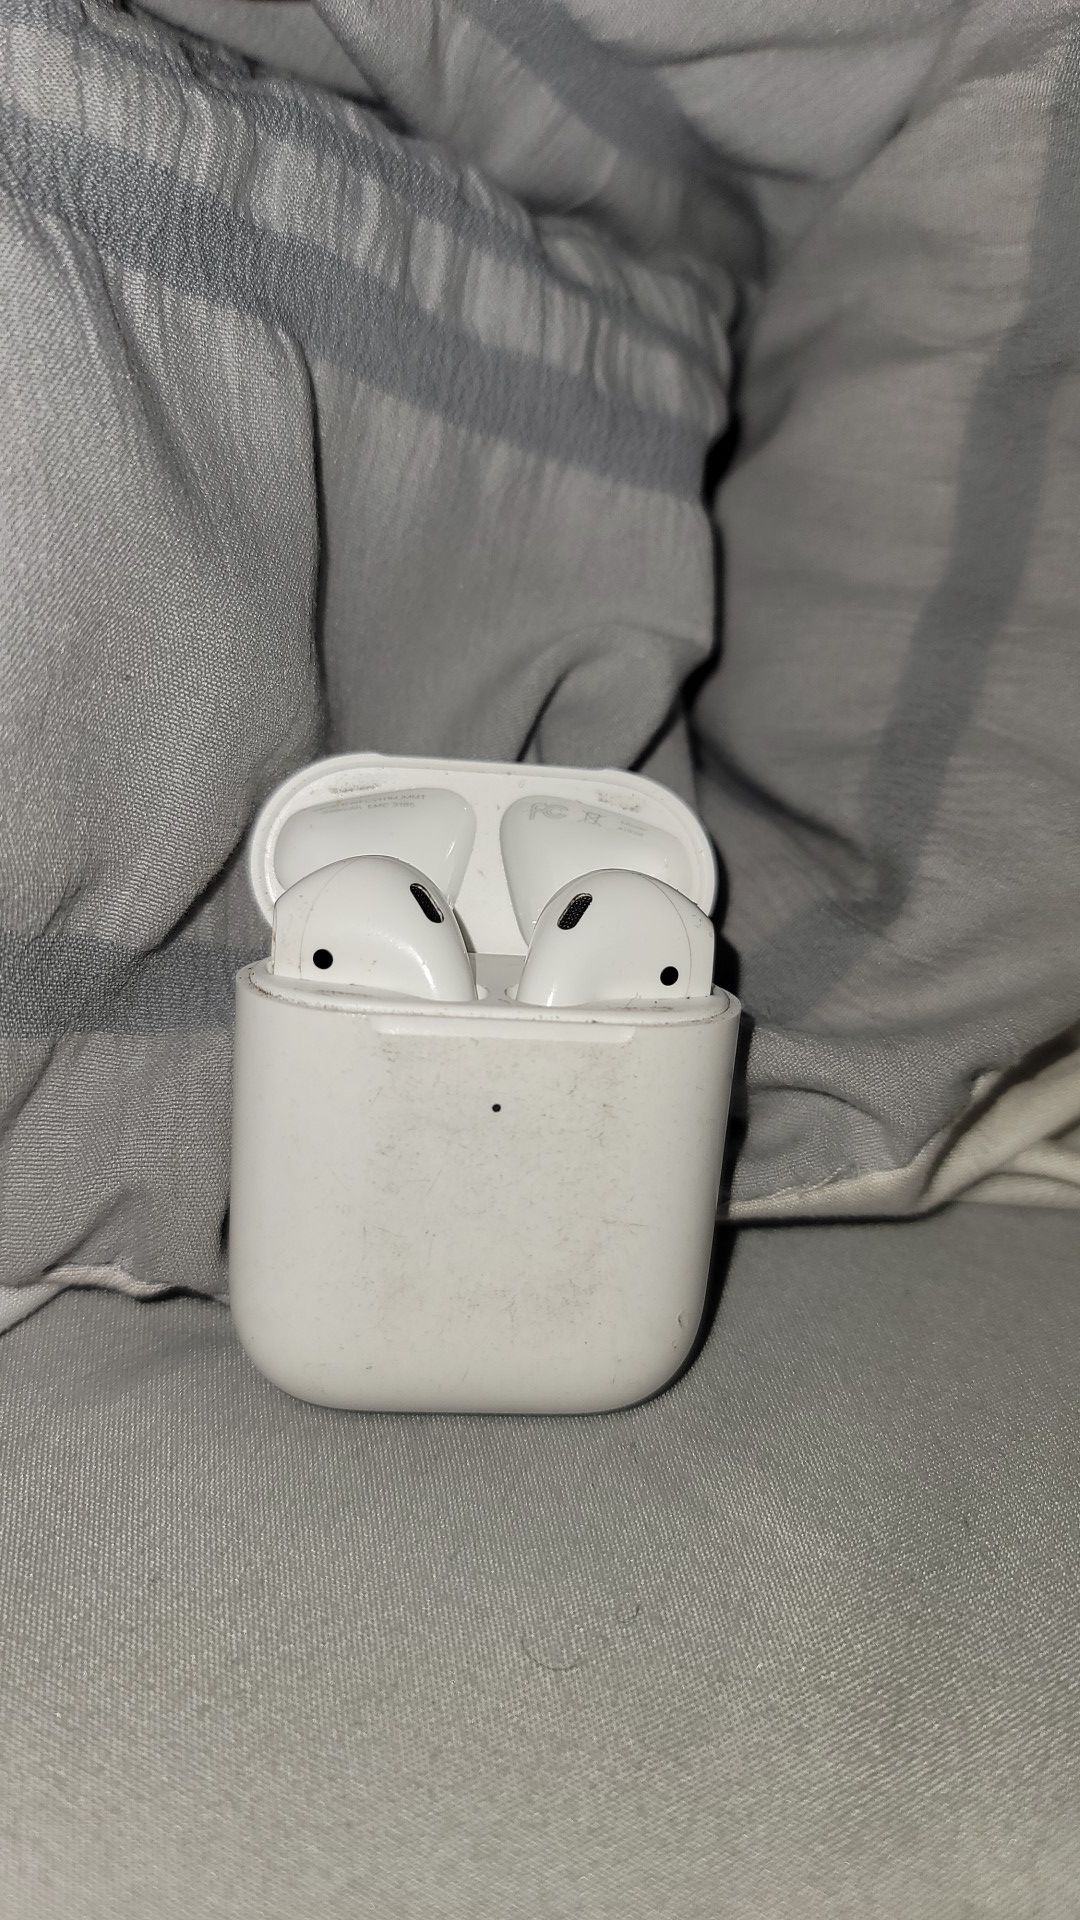 airpods wireless charge